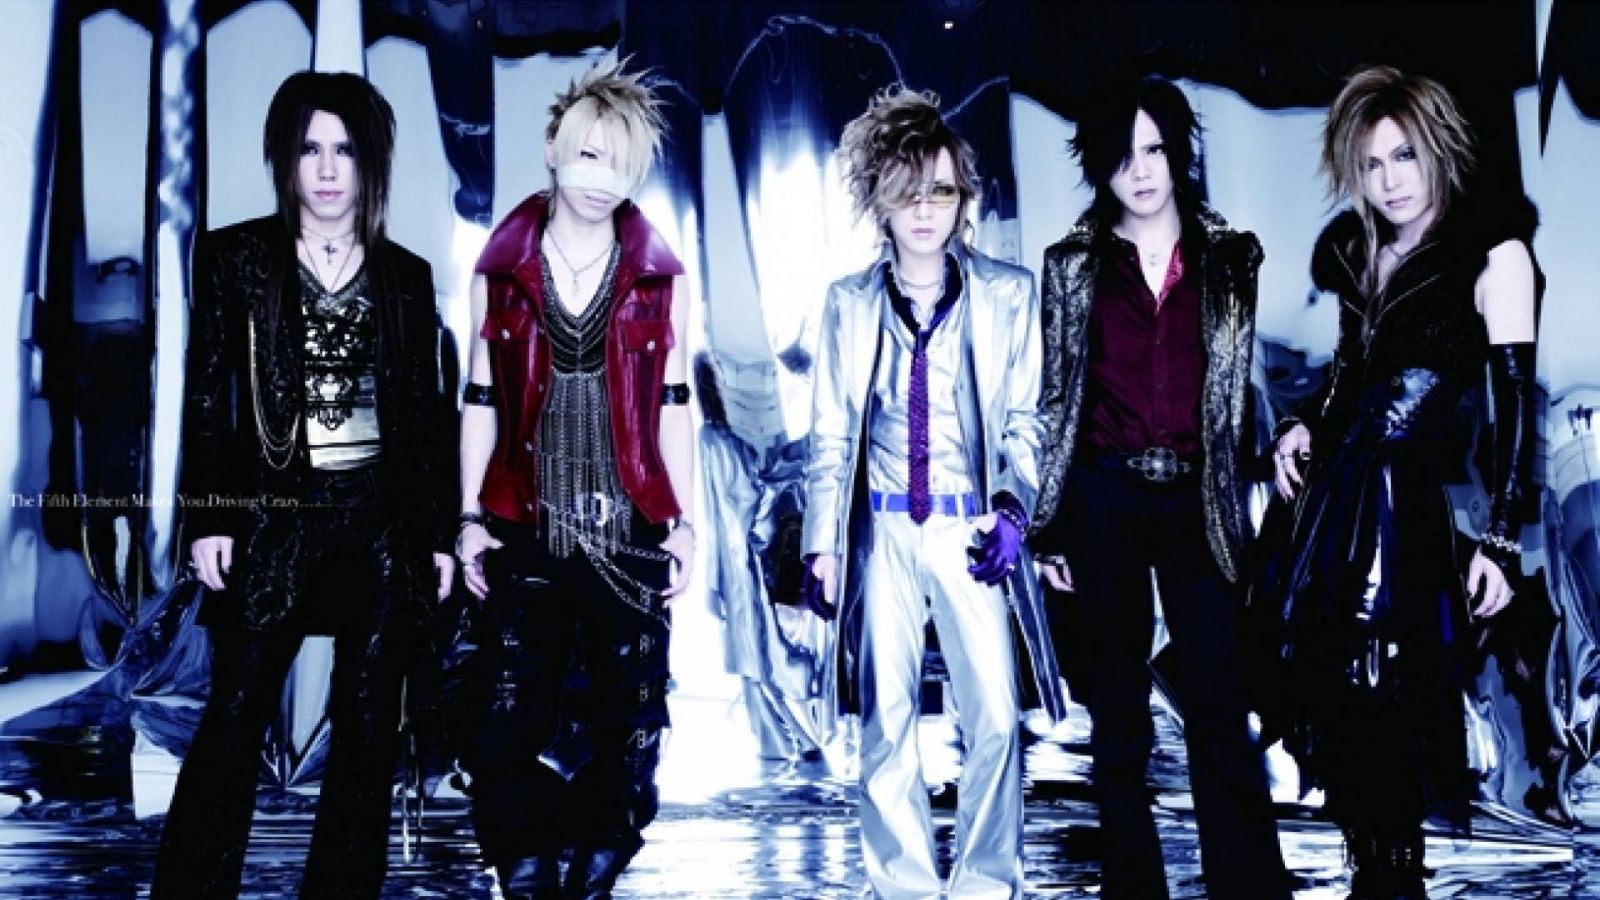 the GazettE © 2008 Zy.connection Inc. All Rights Reserved.